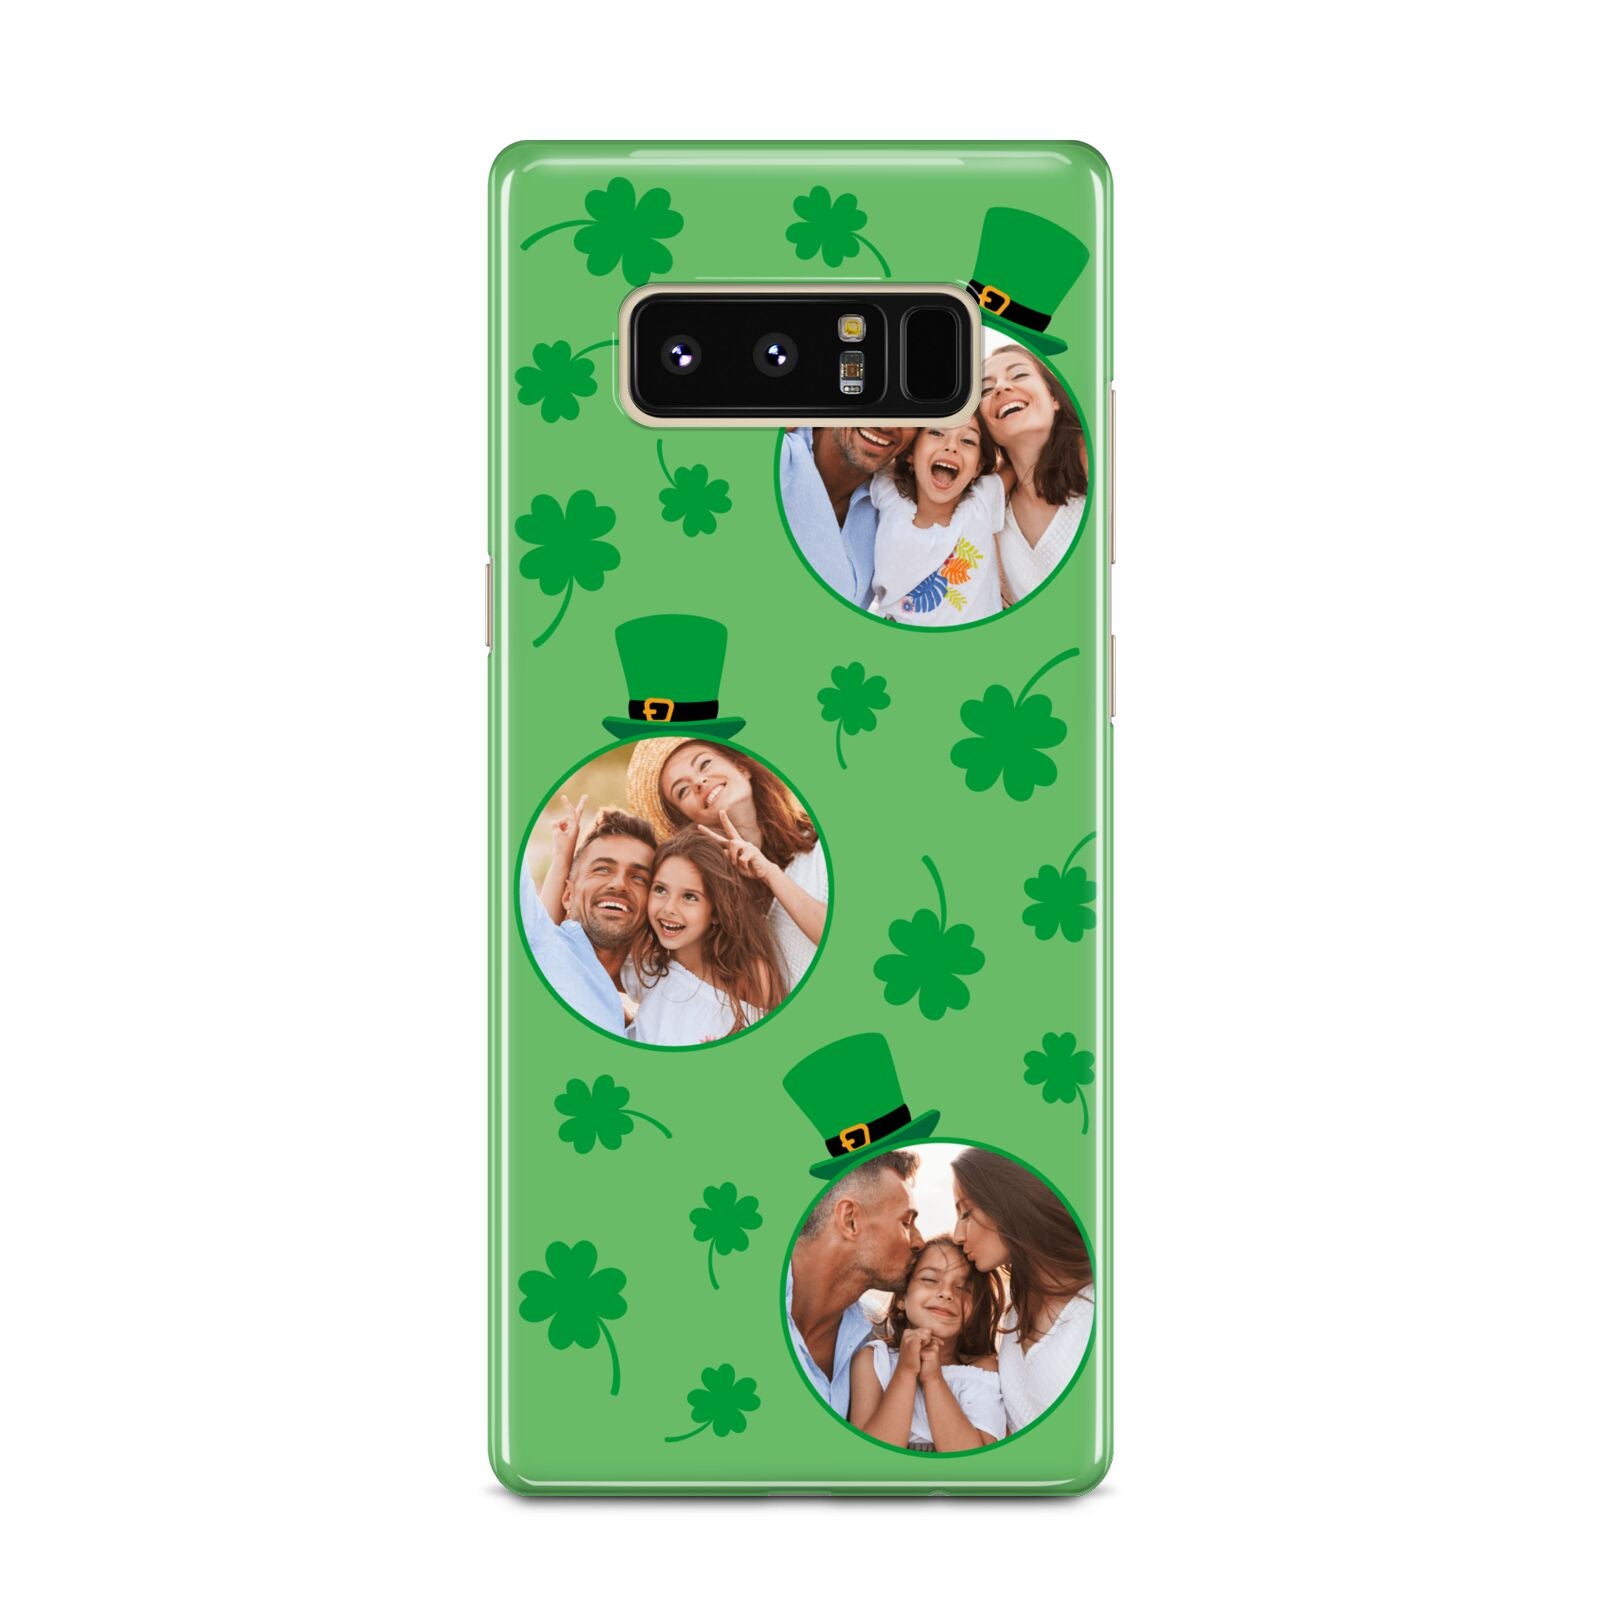 St Patricks Day Personalised Photo Samsung Galaxy Note 8 Case